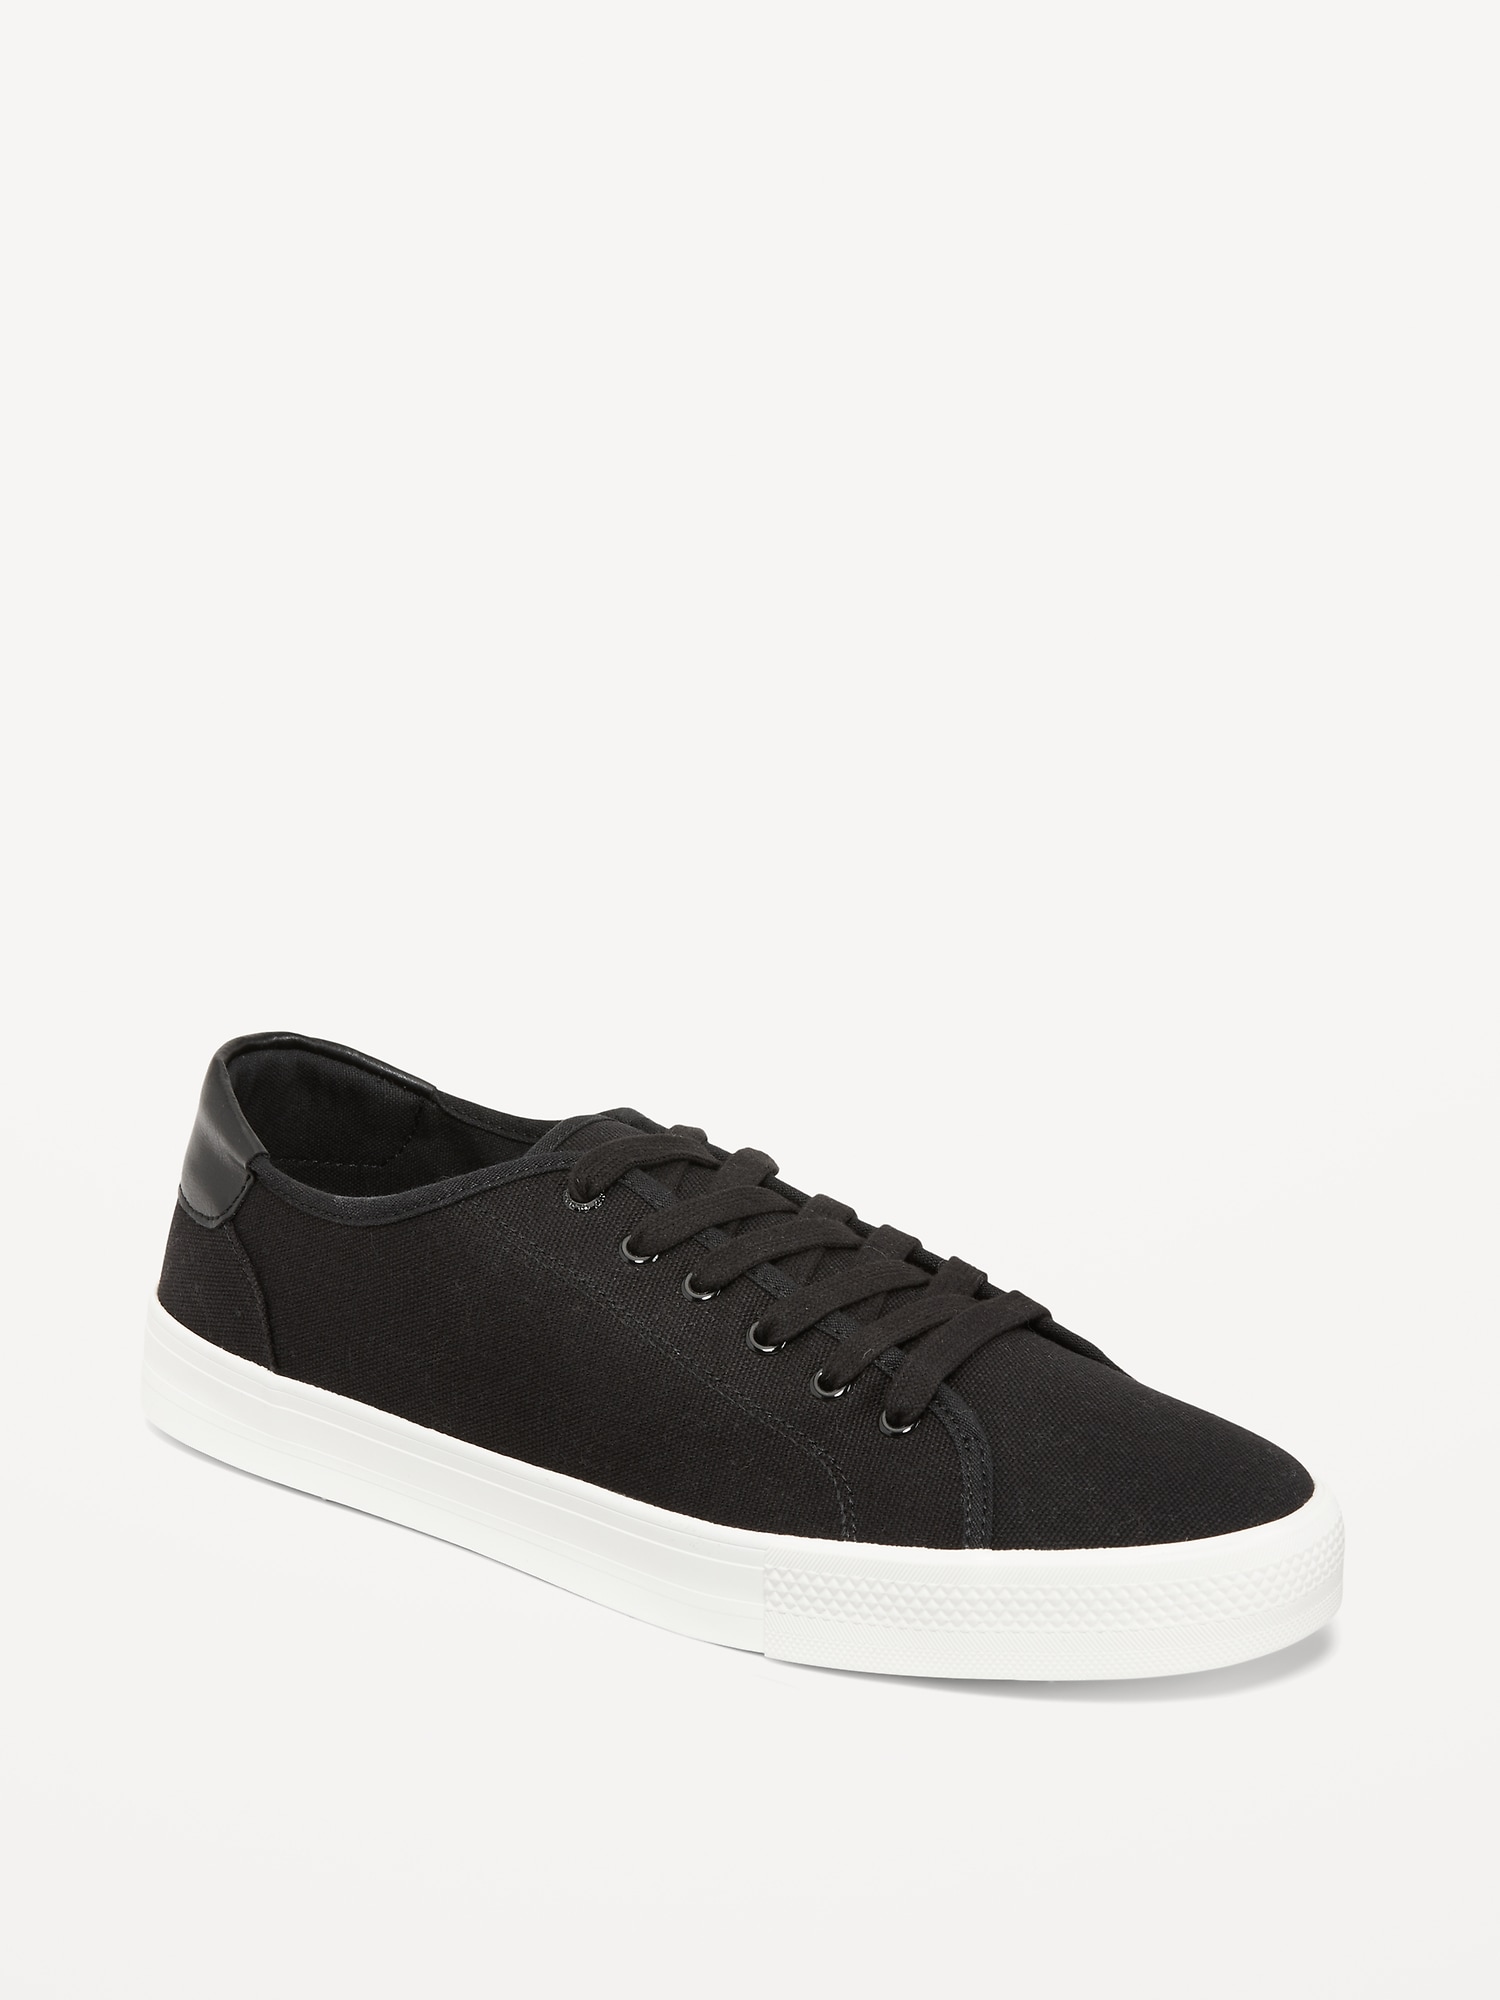 Old Navy Canvas Lace-Up Sneakers for Men black - 546911012